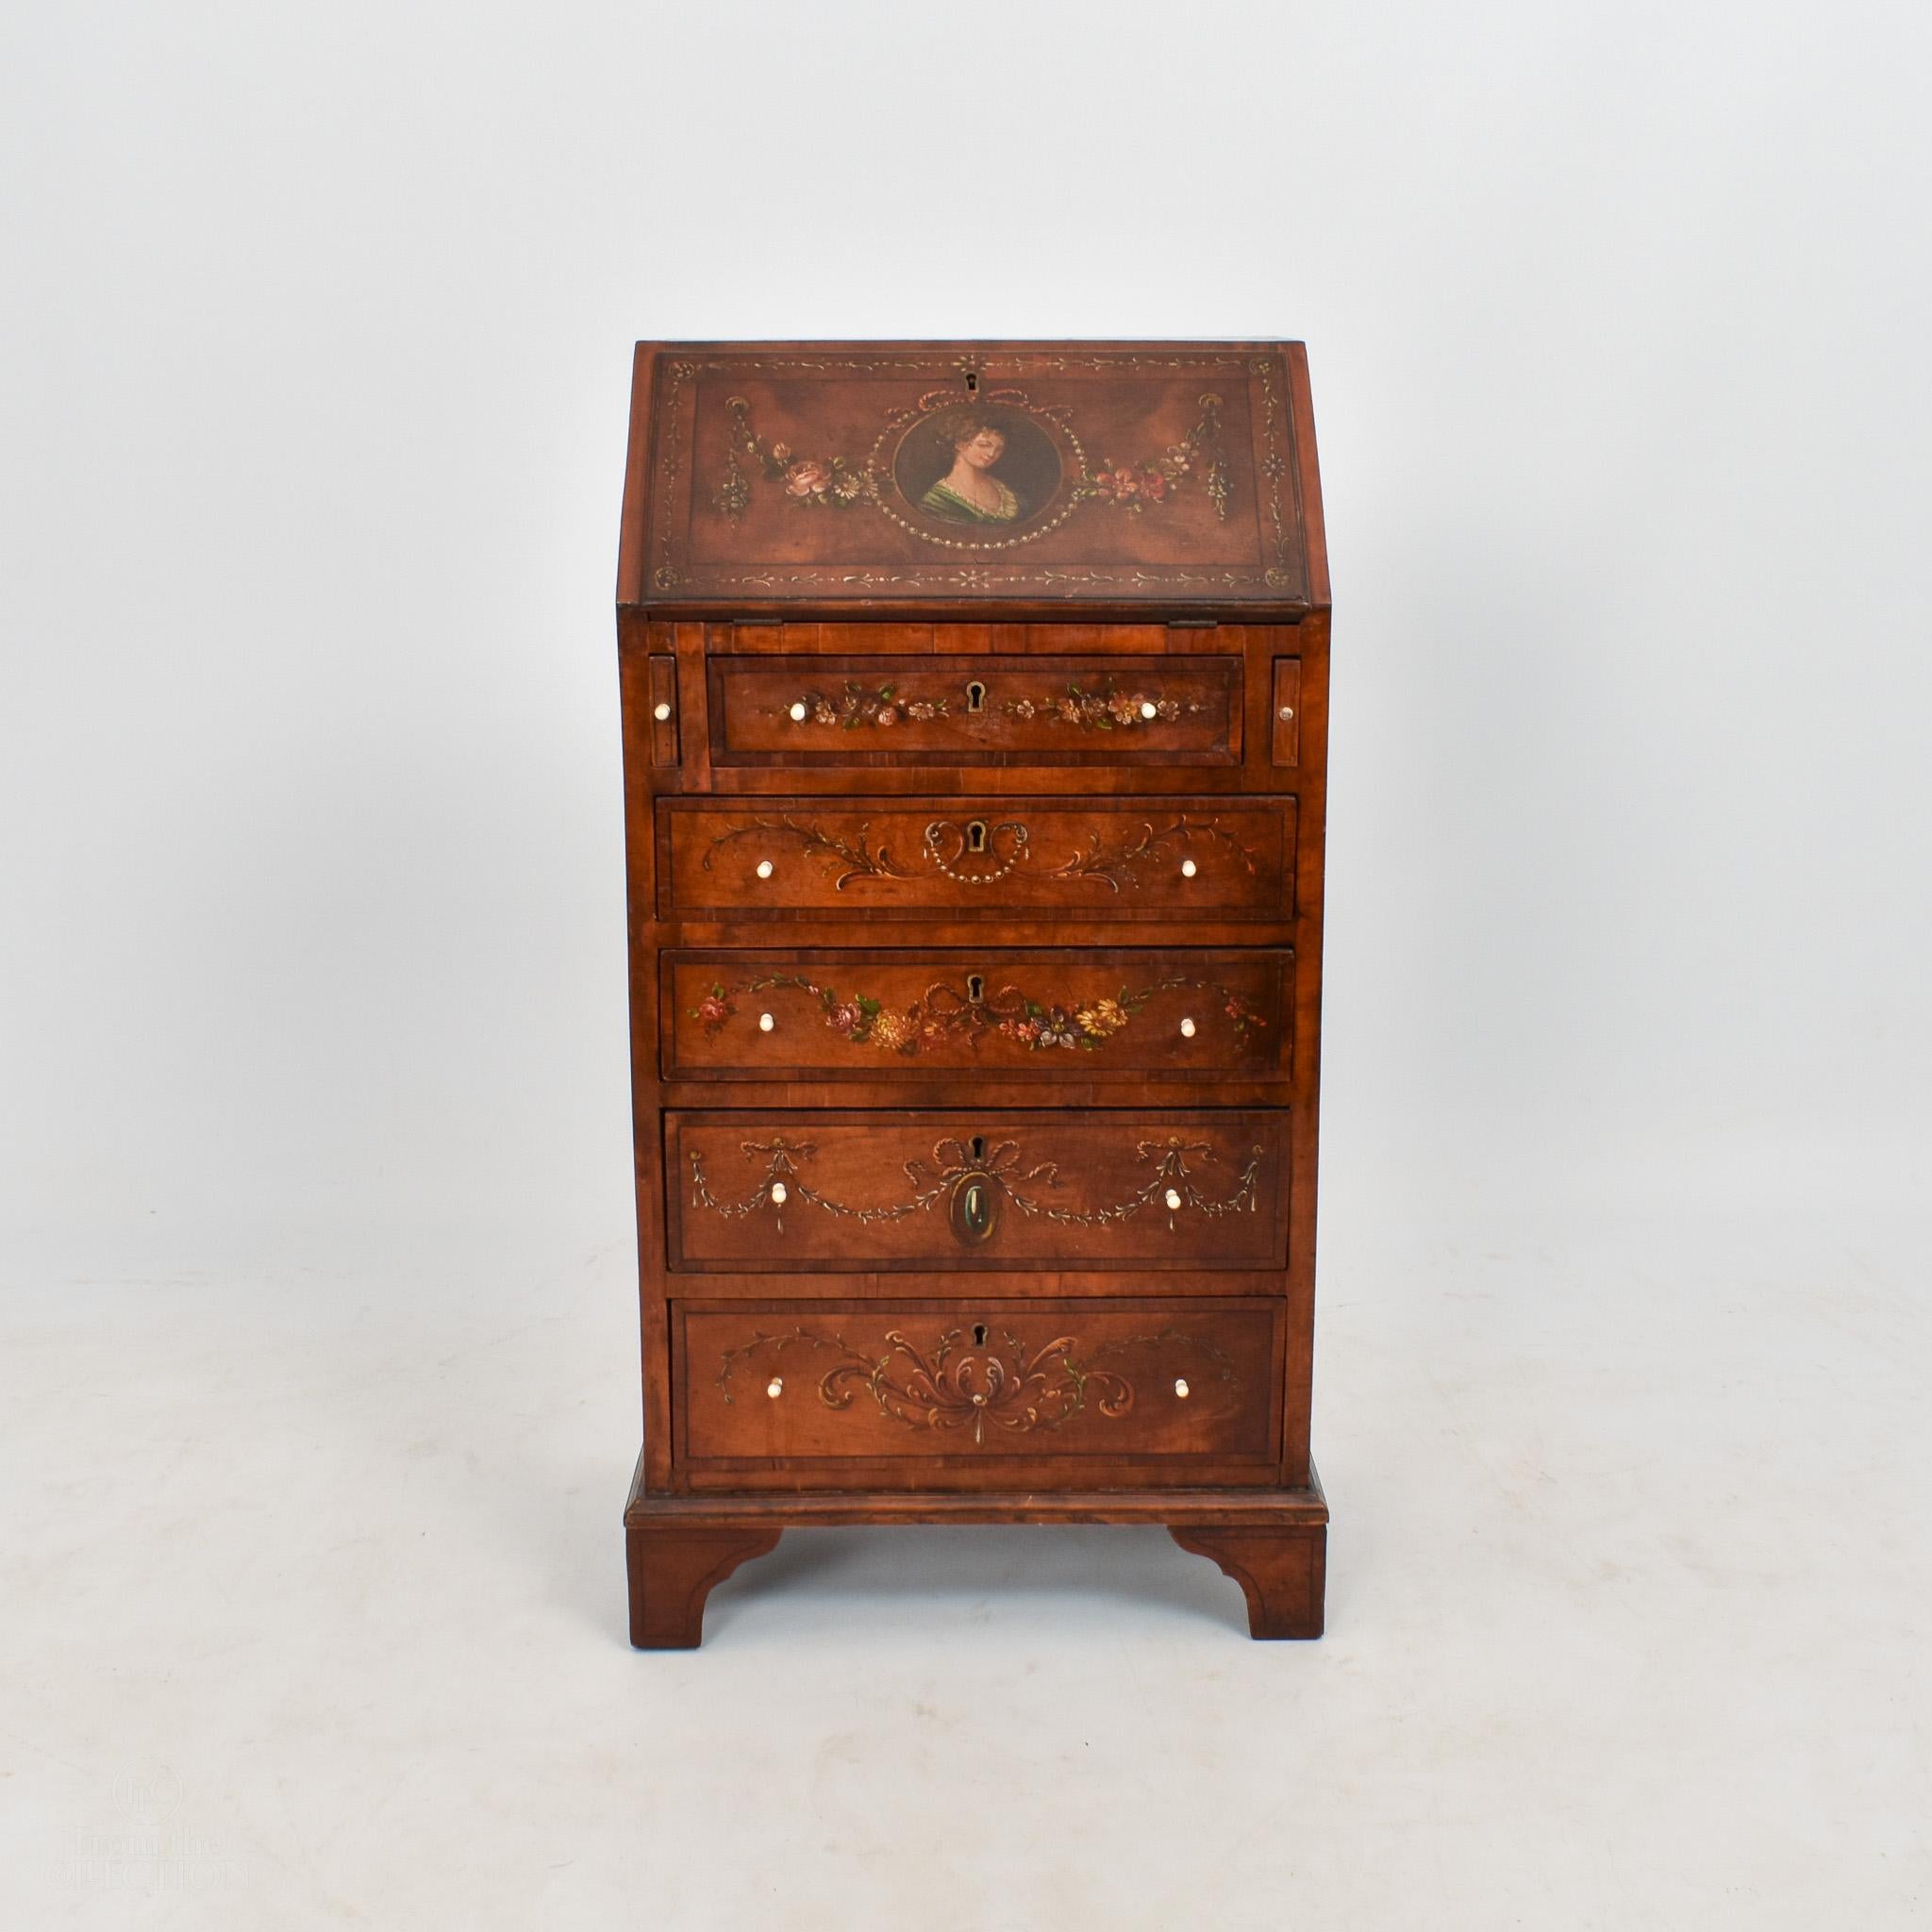 Childs Exceptionally Rare Satinwood Bureau Desk circa 1770 In Good Condition For Sale In Lincoln, GB